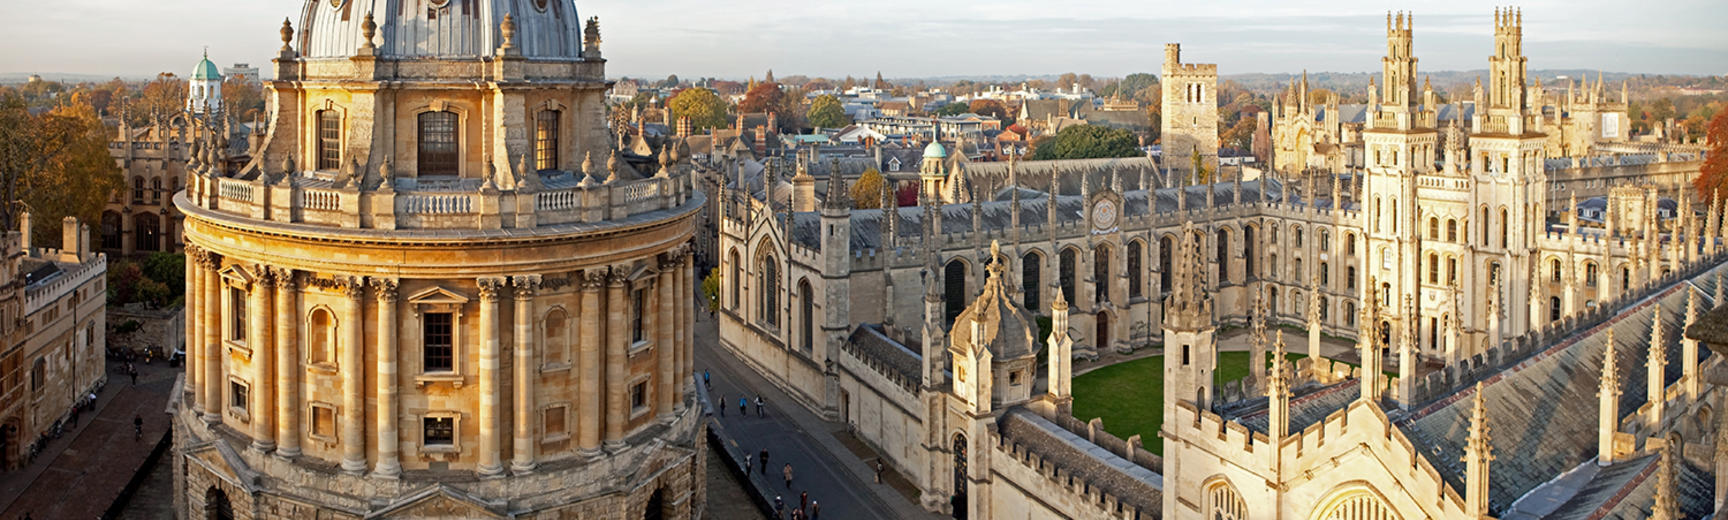 An aerial view of Oxford including the Radcliffe Camera and All Souls College